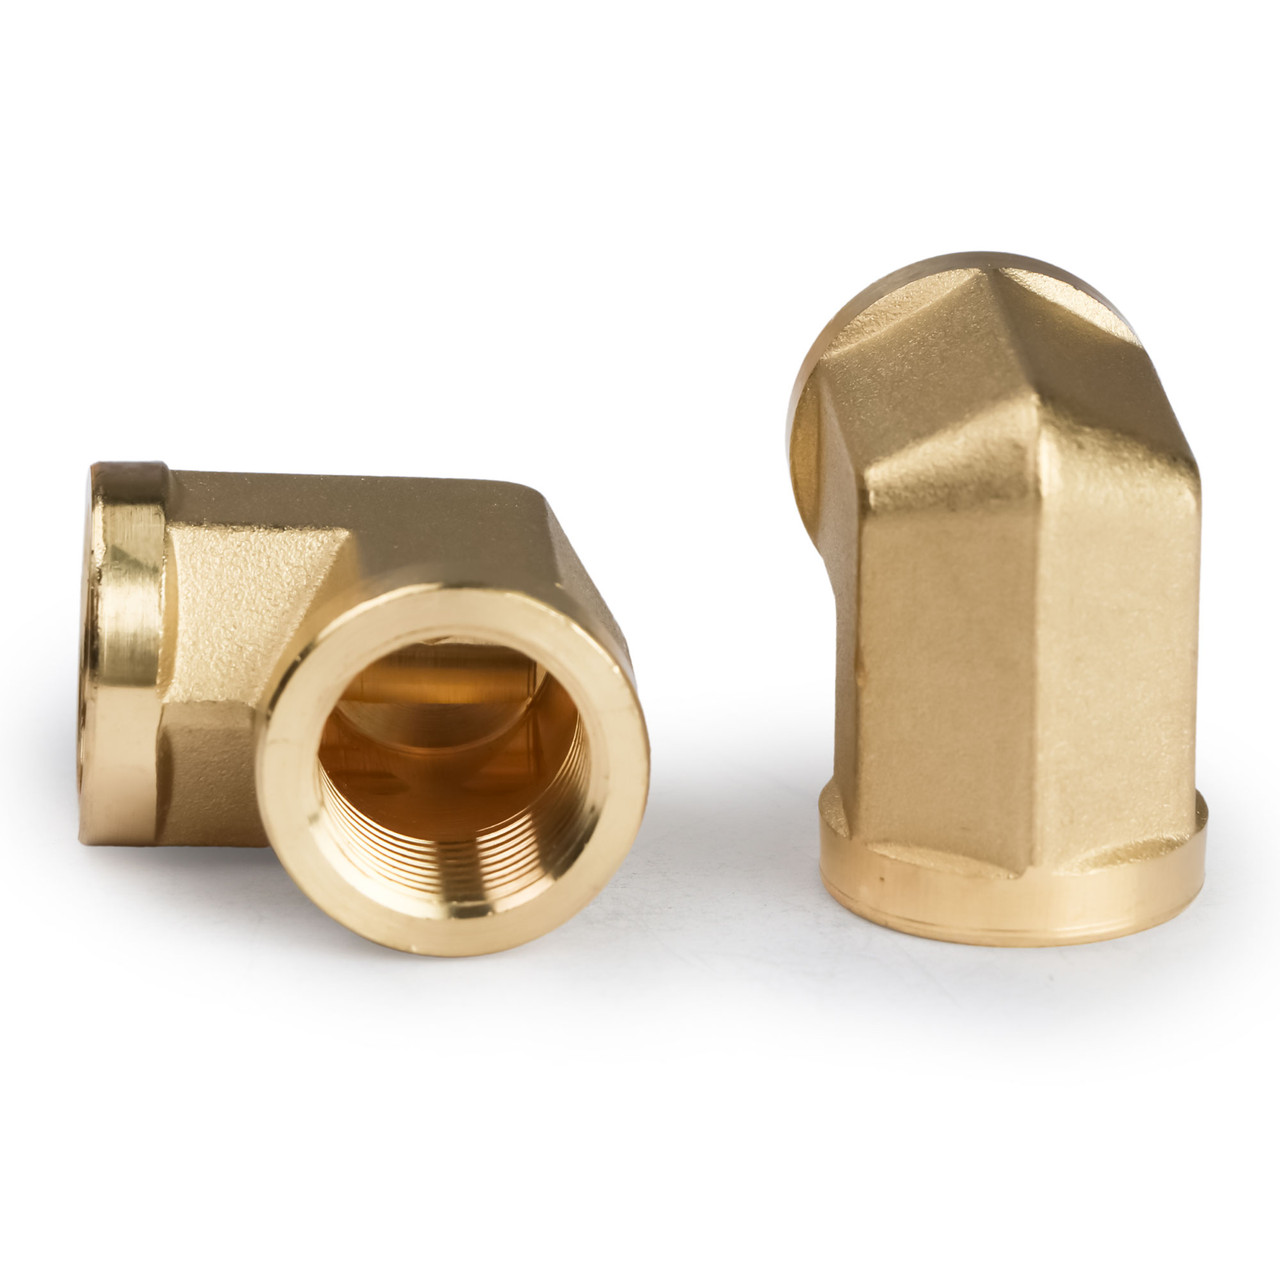 U.S. Solid 2pcs 90 Degree Barstock Street Elbow Brass Pipe Fitting